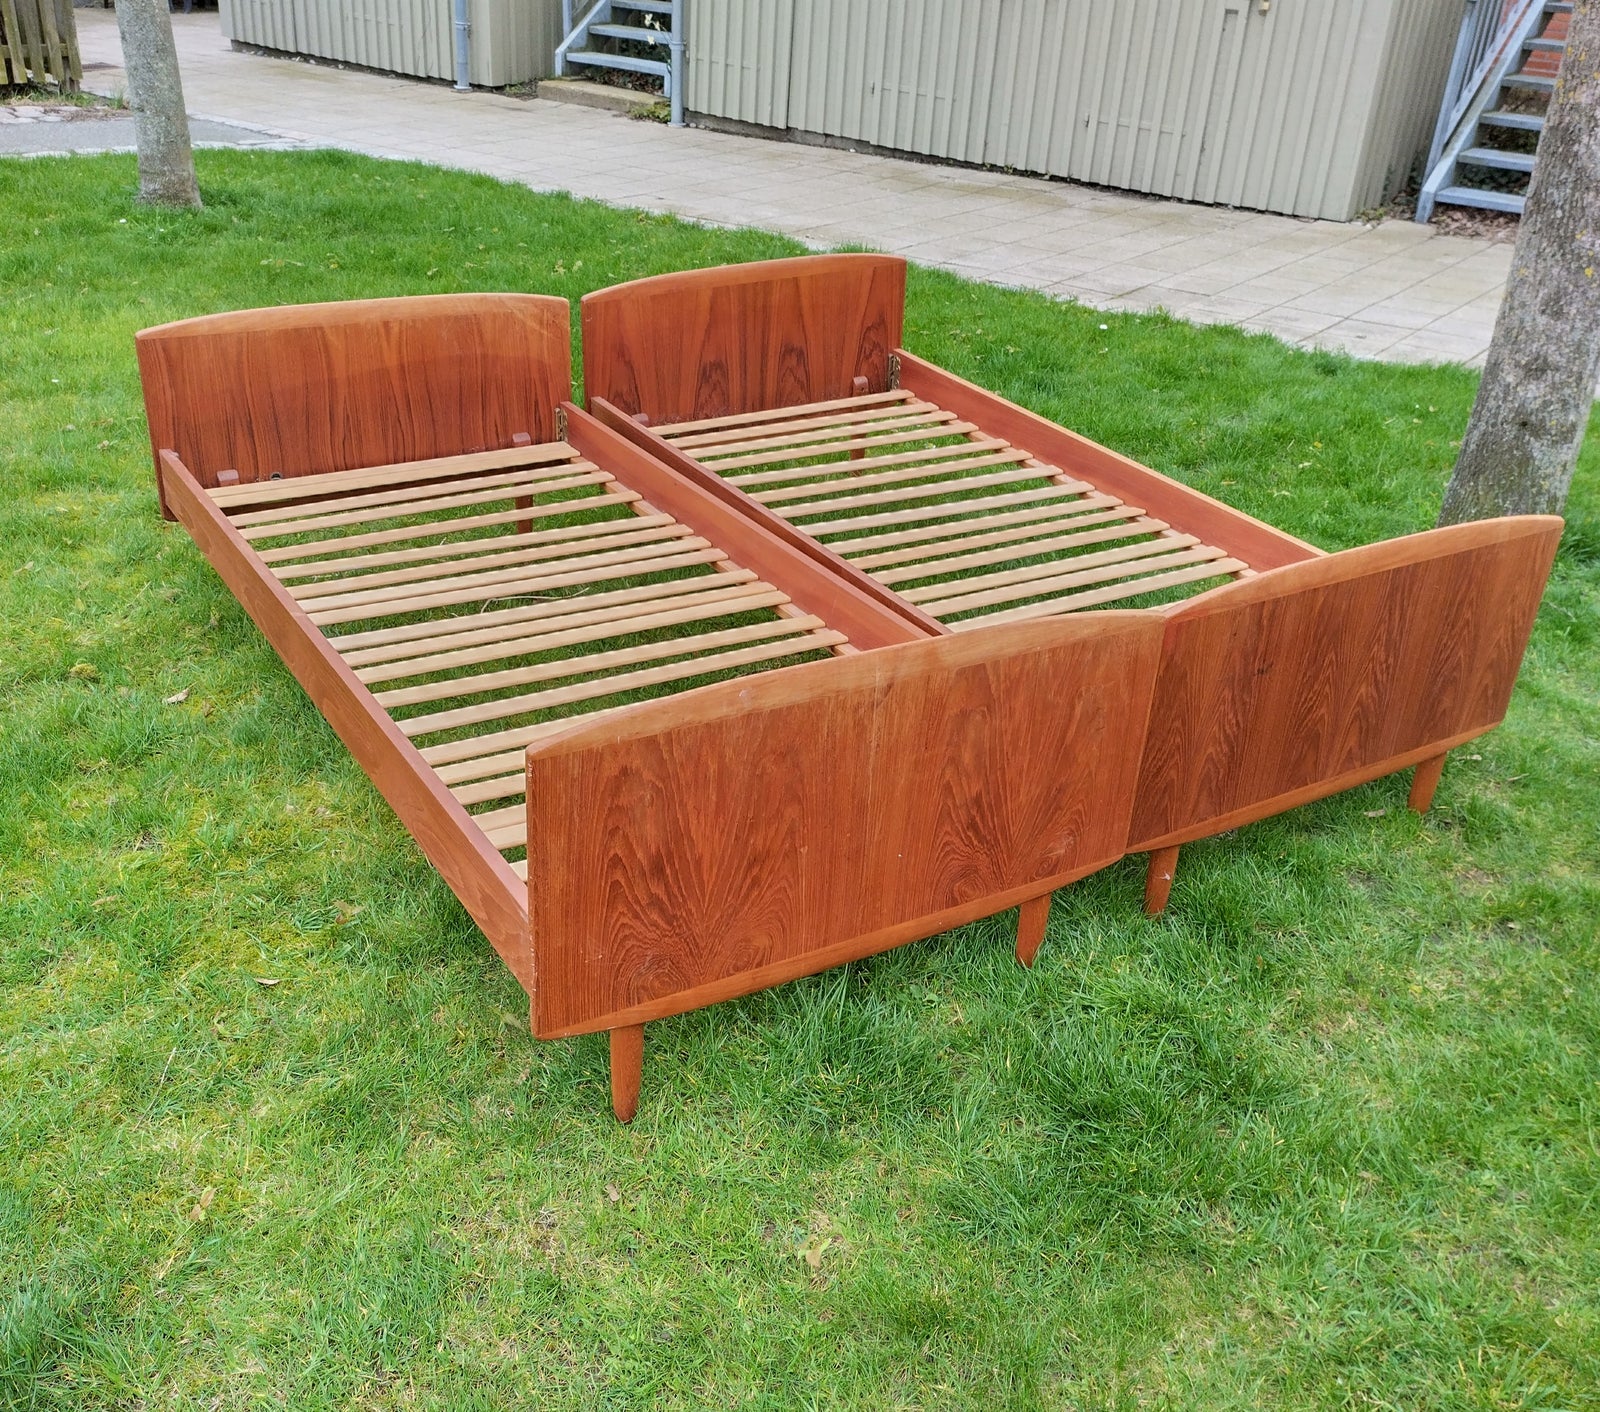 Daybed, træ, 1 pers.